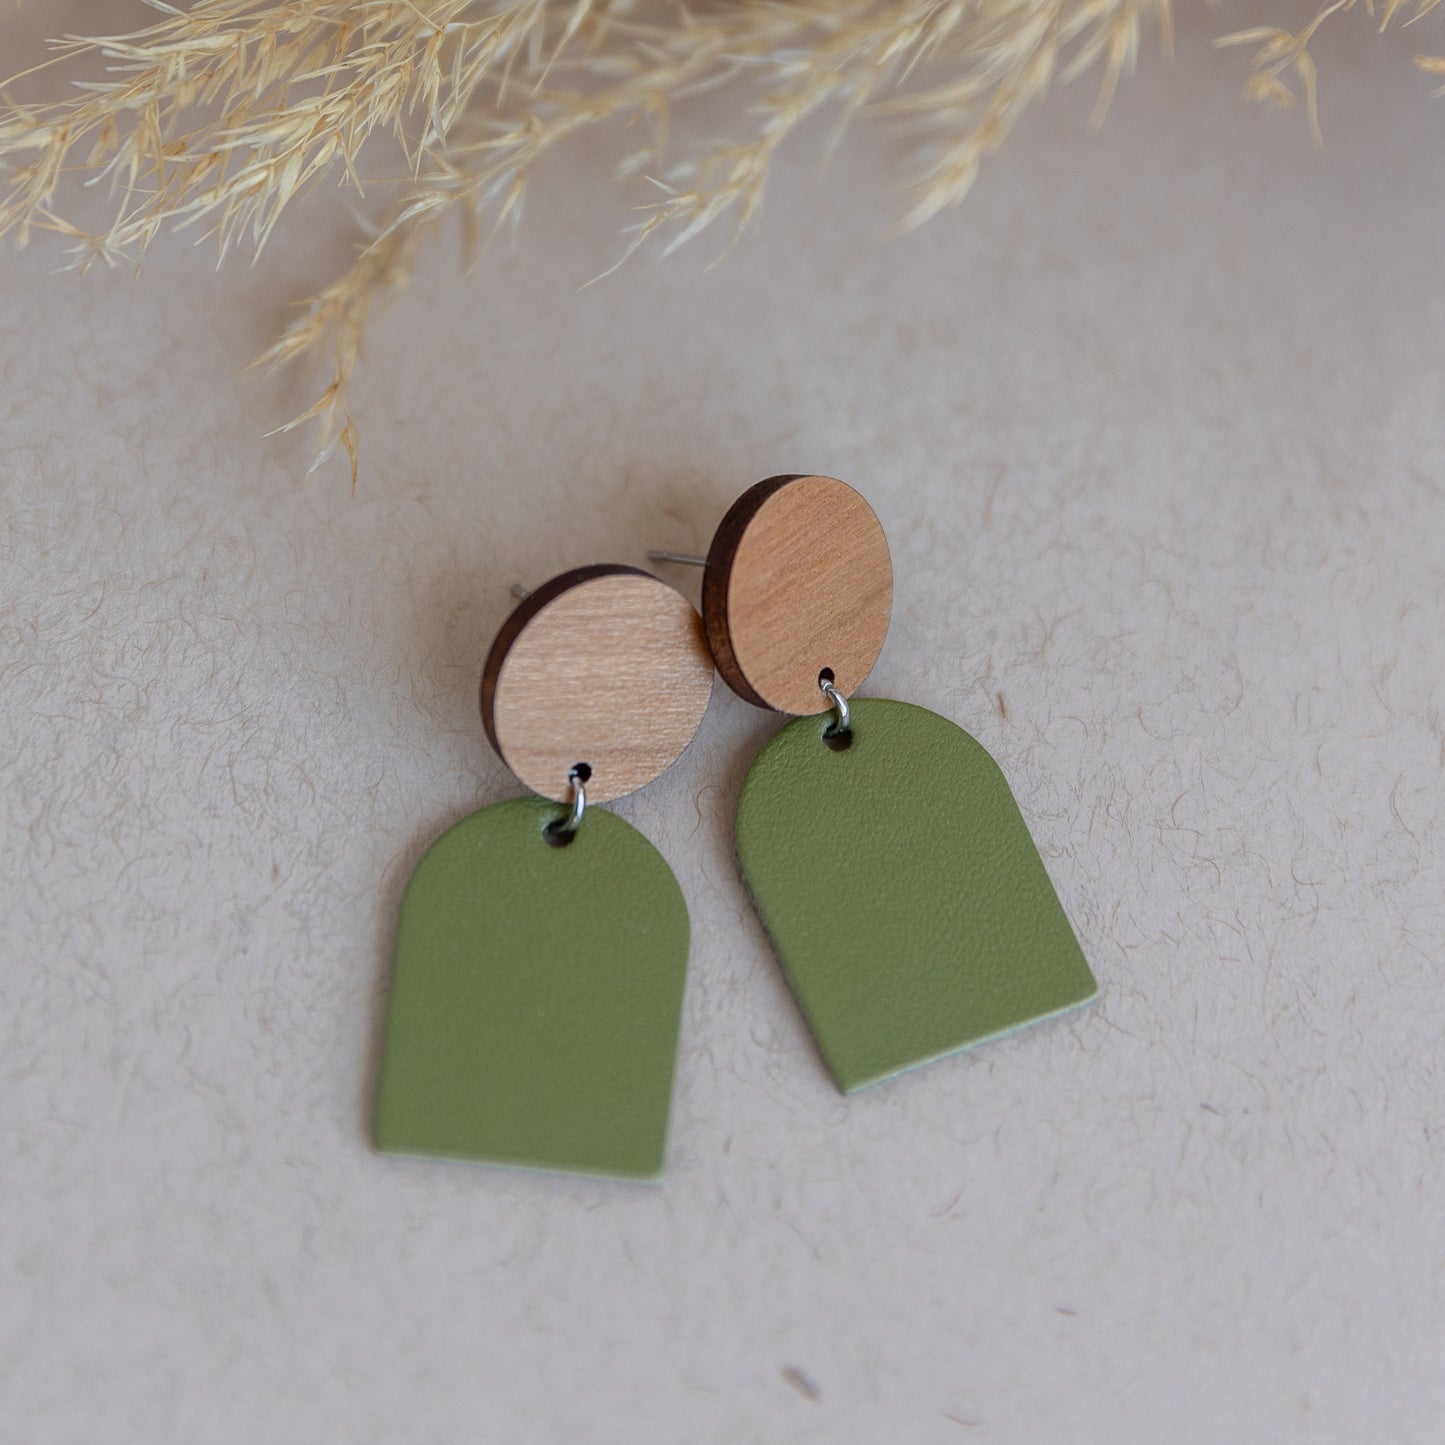 THE ARCH DANGLE in Olive Green/ Lightweight Leather + Wood Earrings